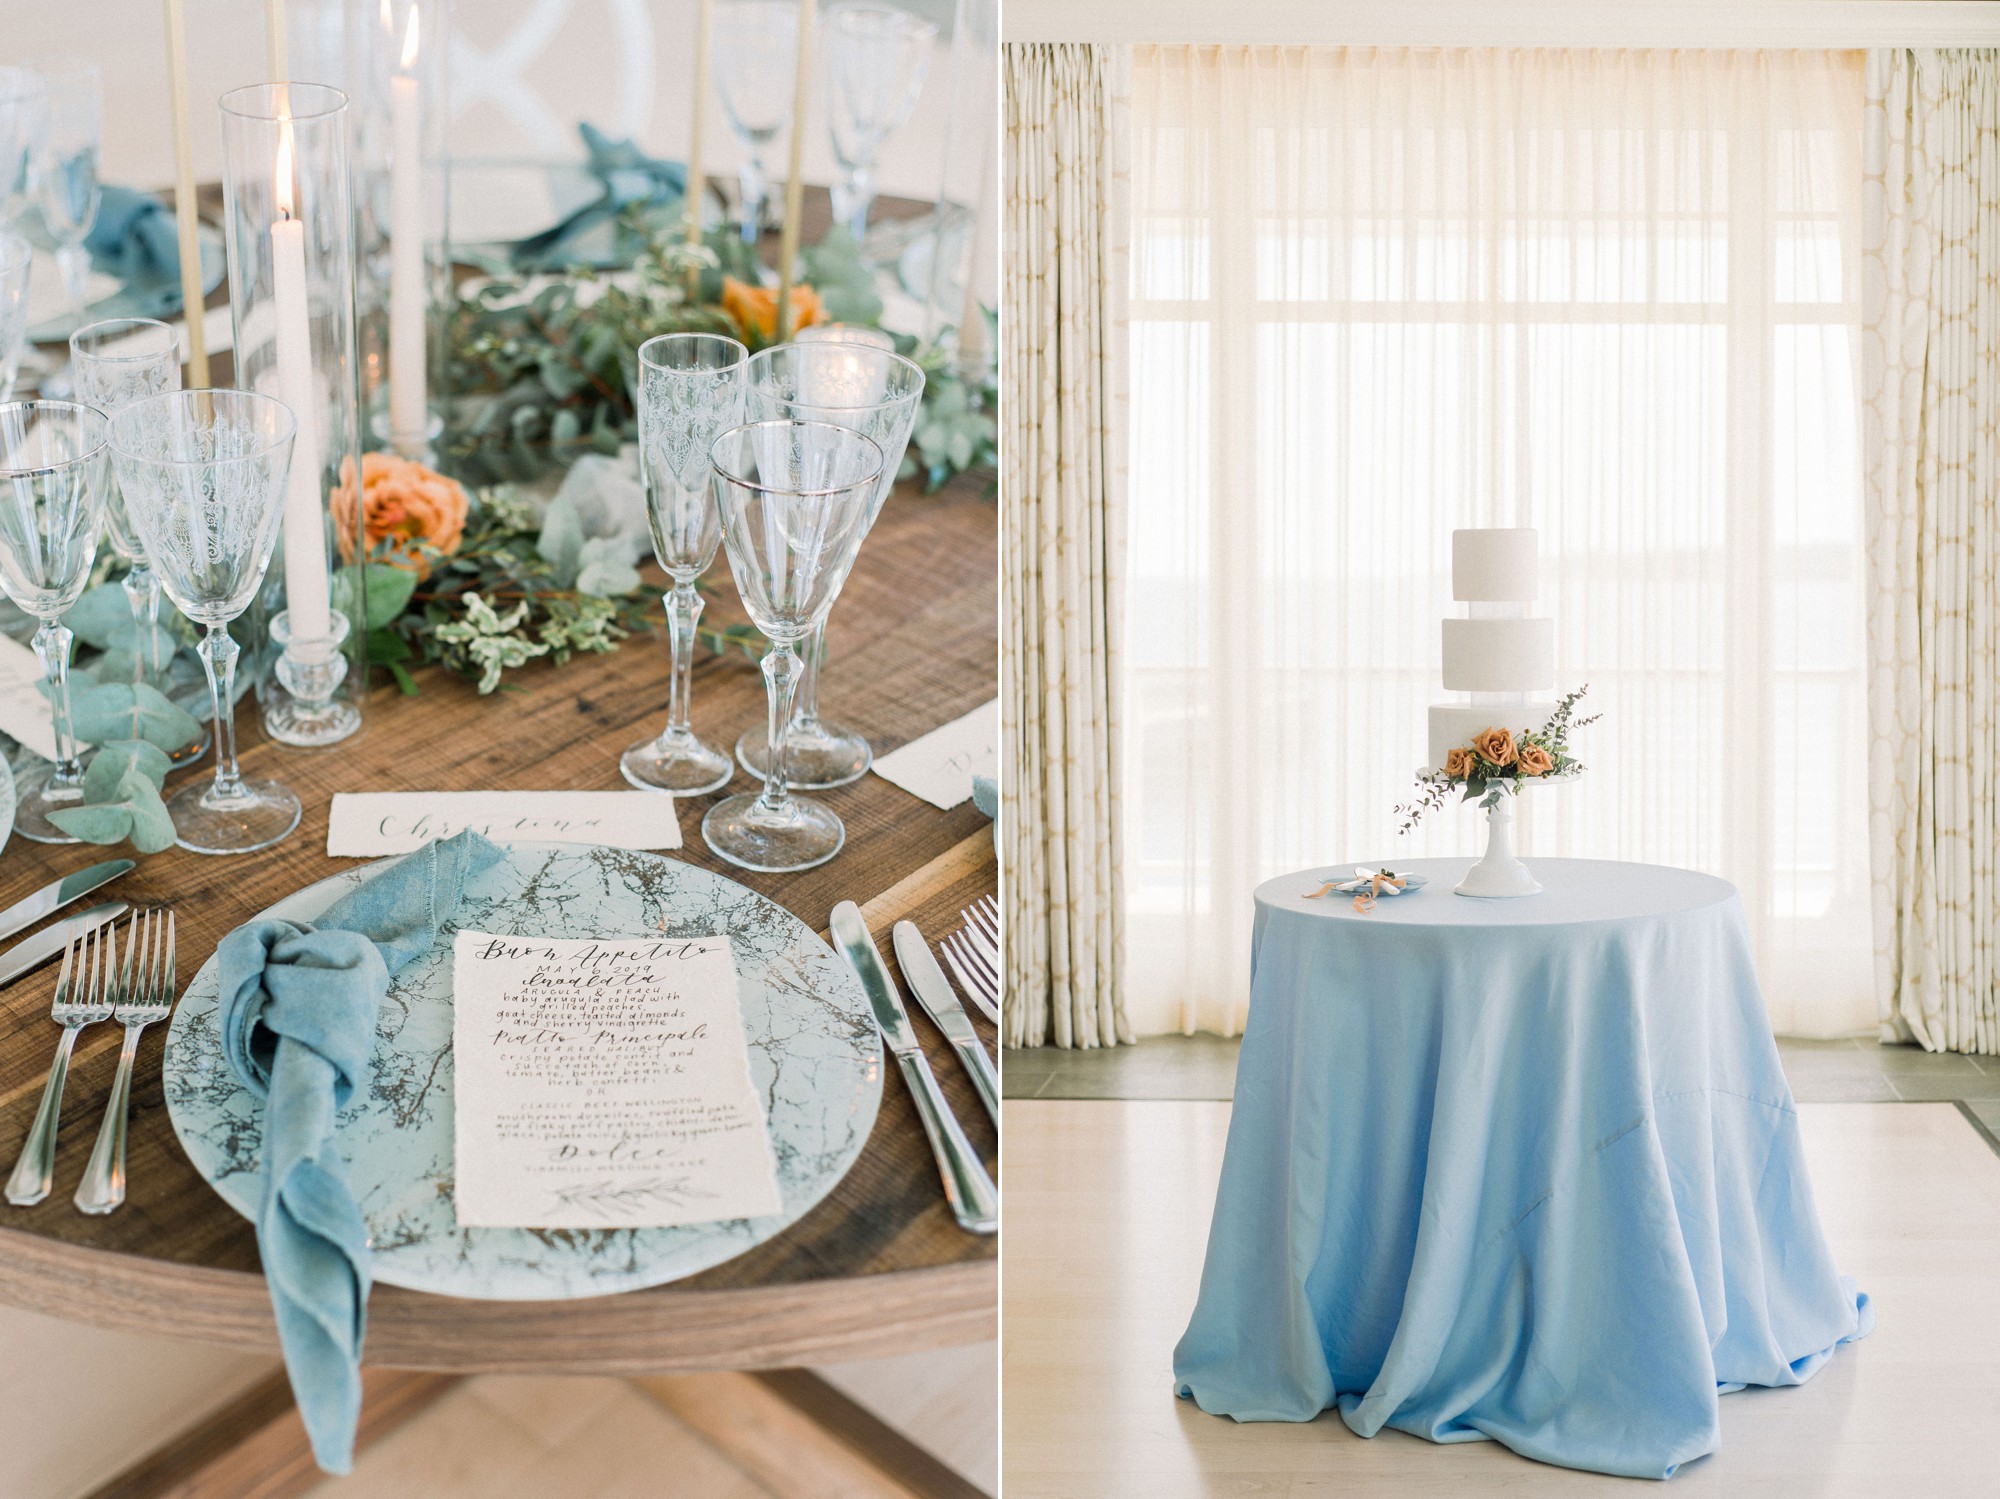 Gloucester MA Beauport Hotel Wedding | Tuscan meets modern | Party Rental LTD glass marble charger, glassware, and cloth napkins | hand lettered calligraphy wedding menus | modern tiered wedding cake by Silver Whisk Bakery | Reception inspiration